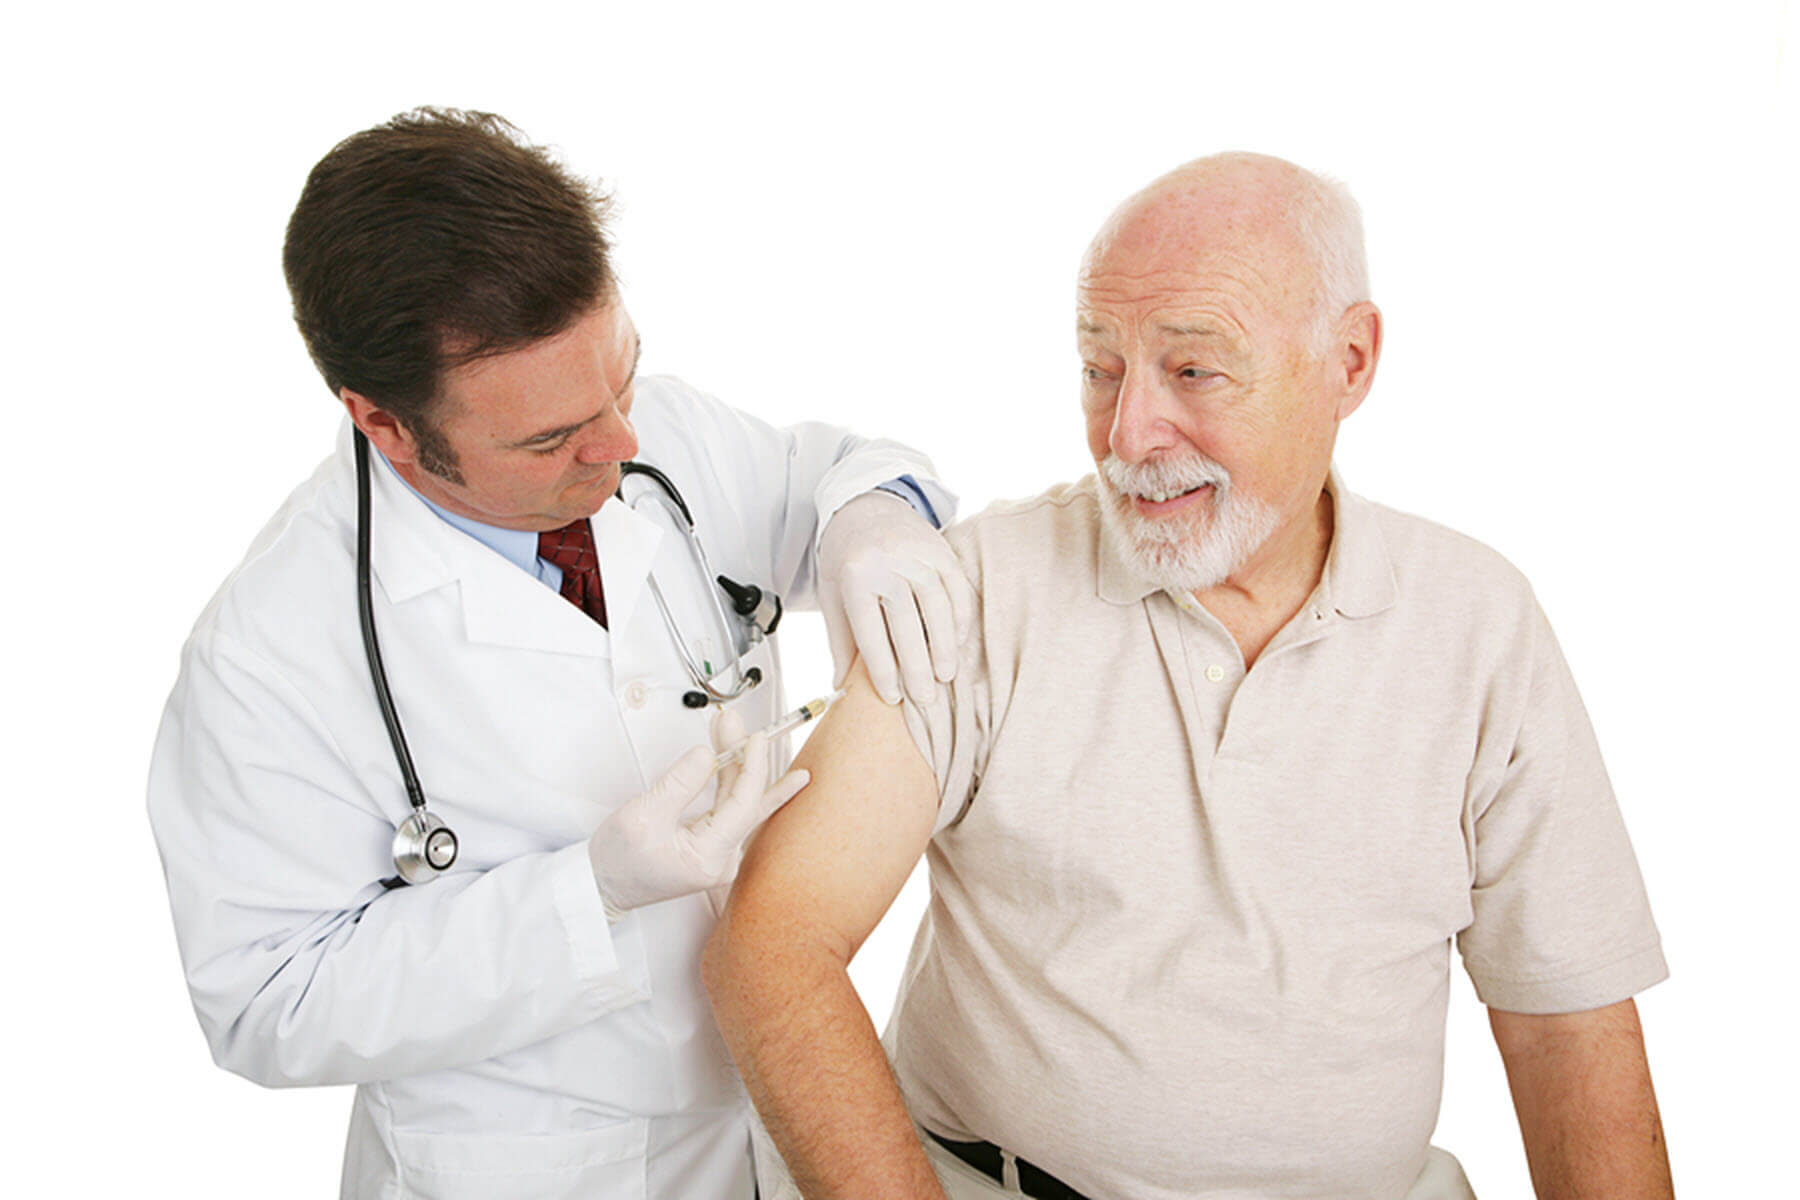 Home Care Services in Foley AL: Does Medicare Cover Vaccines?